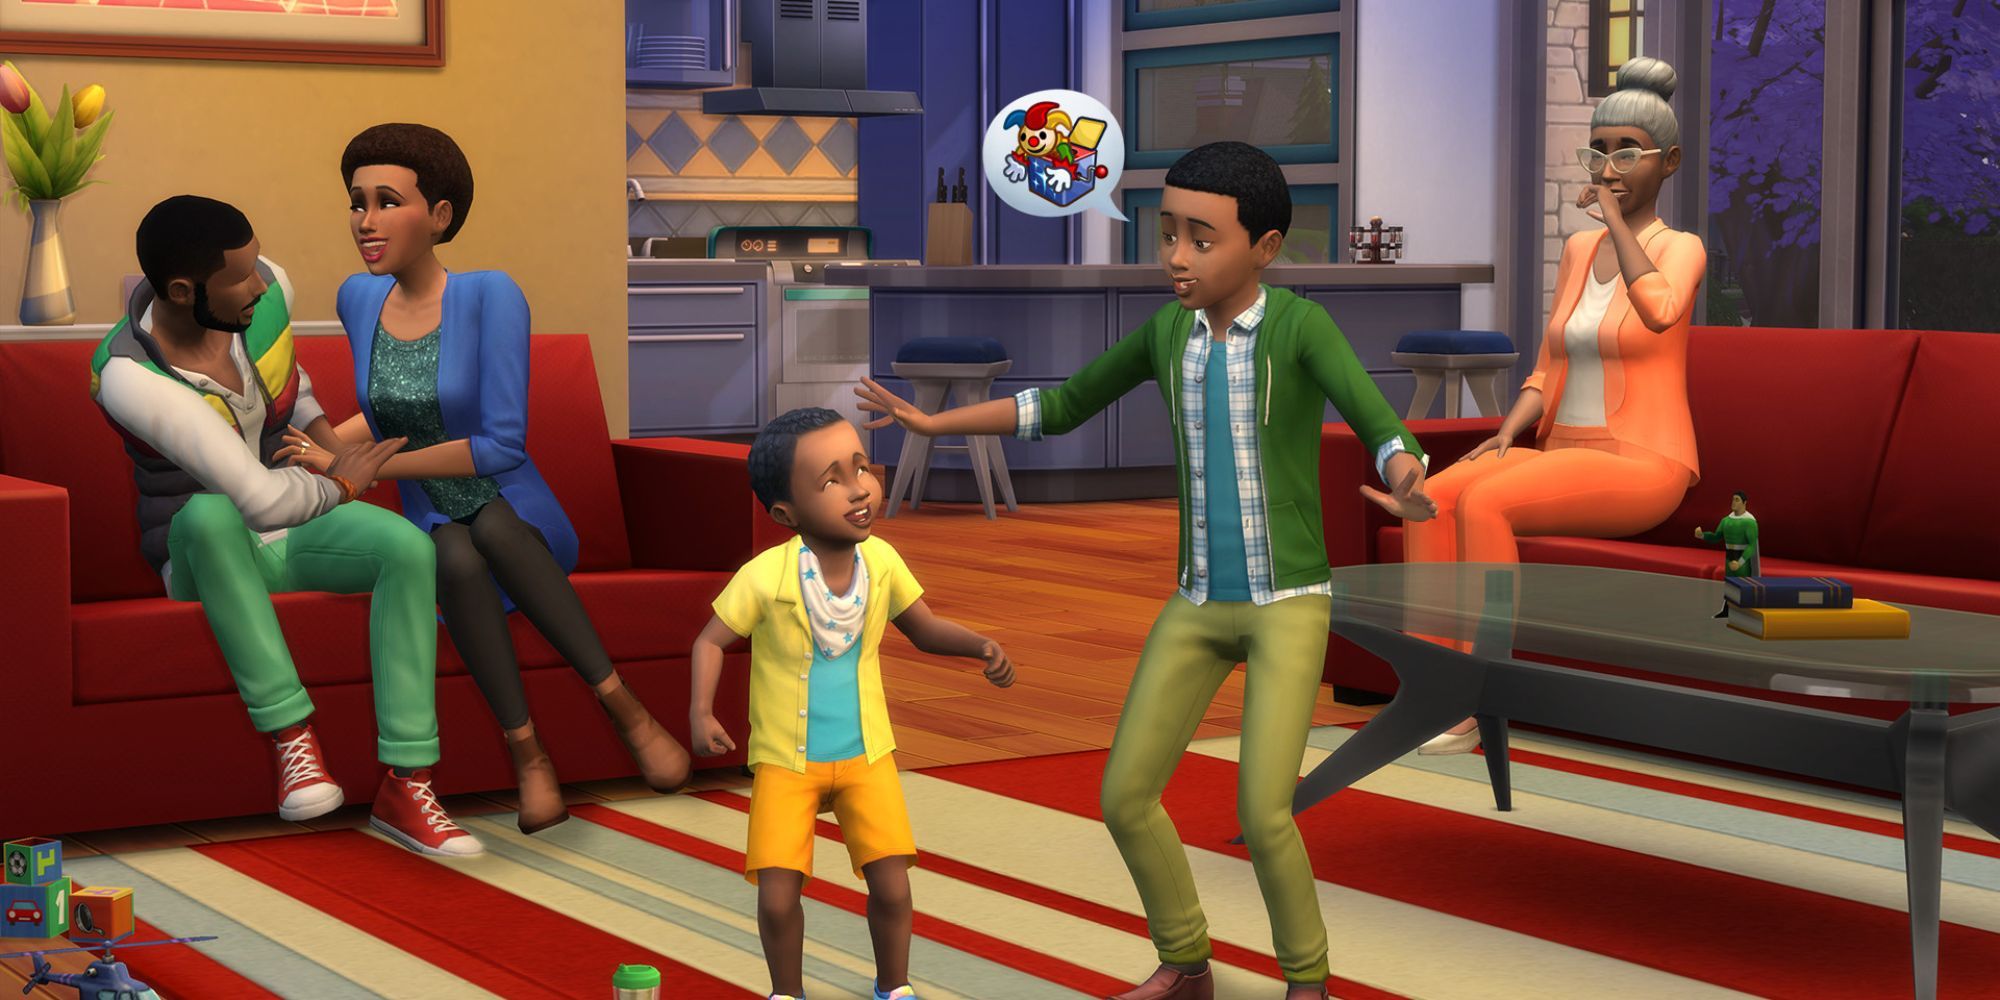 The Sims 4 family sat together in living room